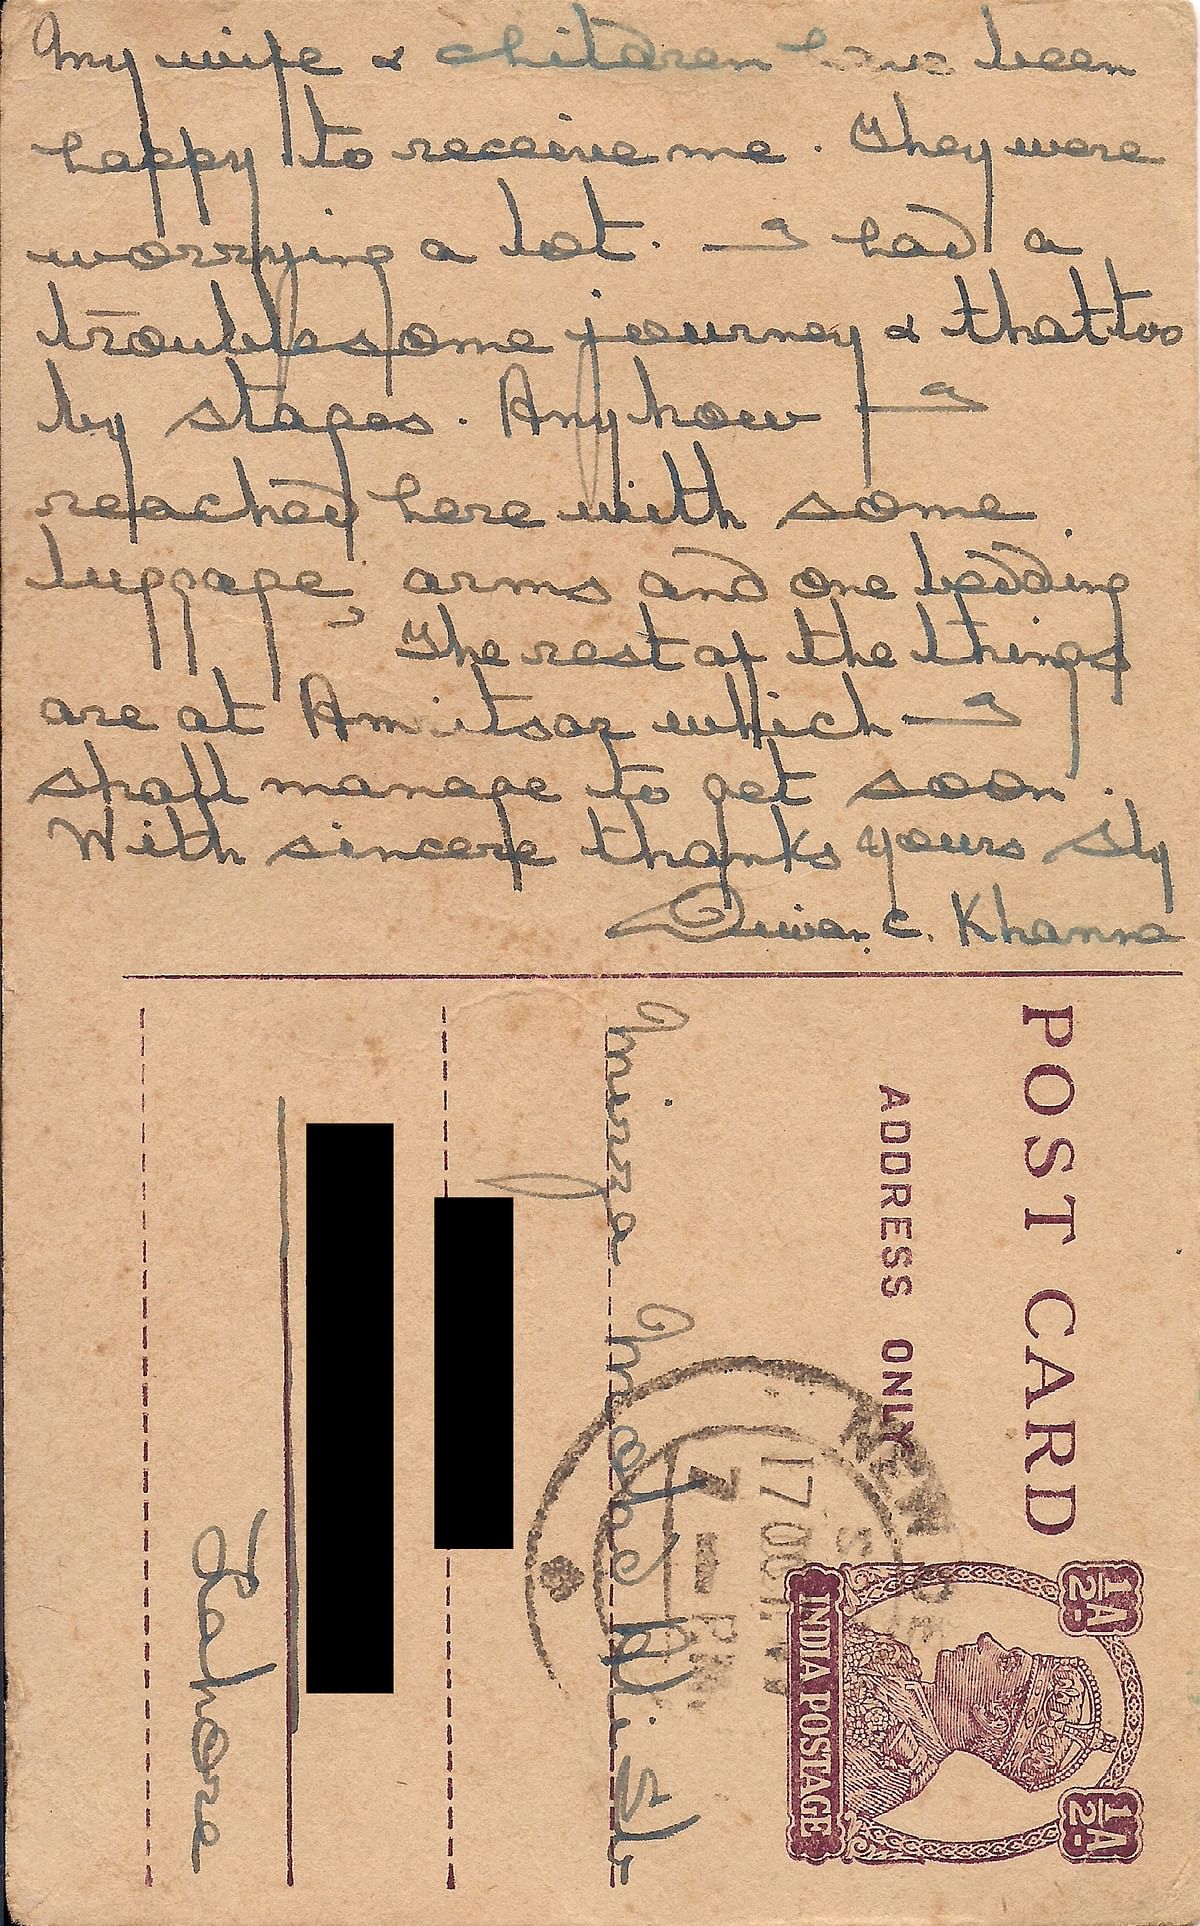 The letter dates back to 17 October 1947.